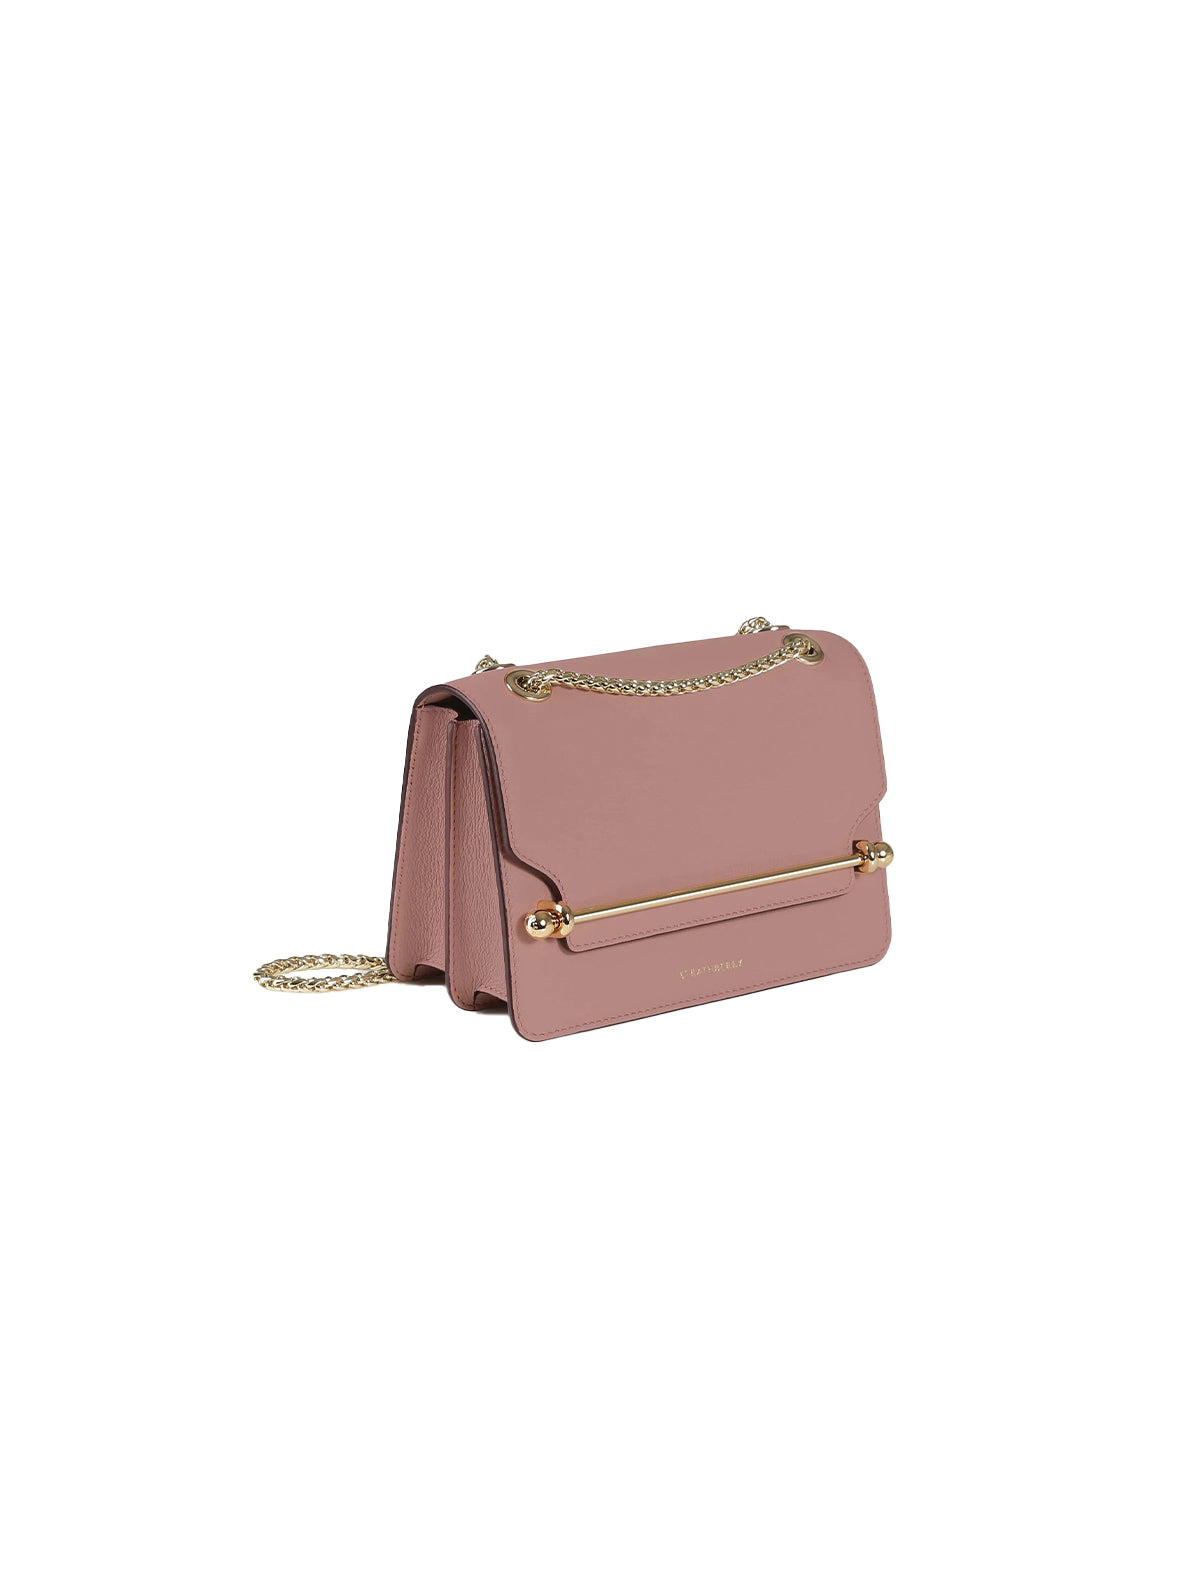 STRATHBERRY East/West Mini Bag in Blush Rose